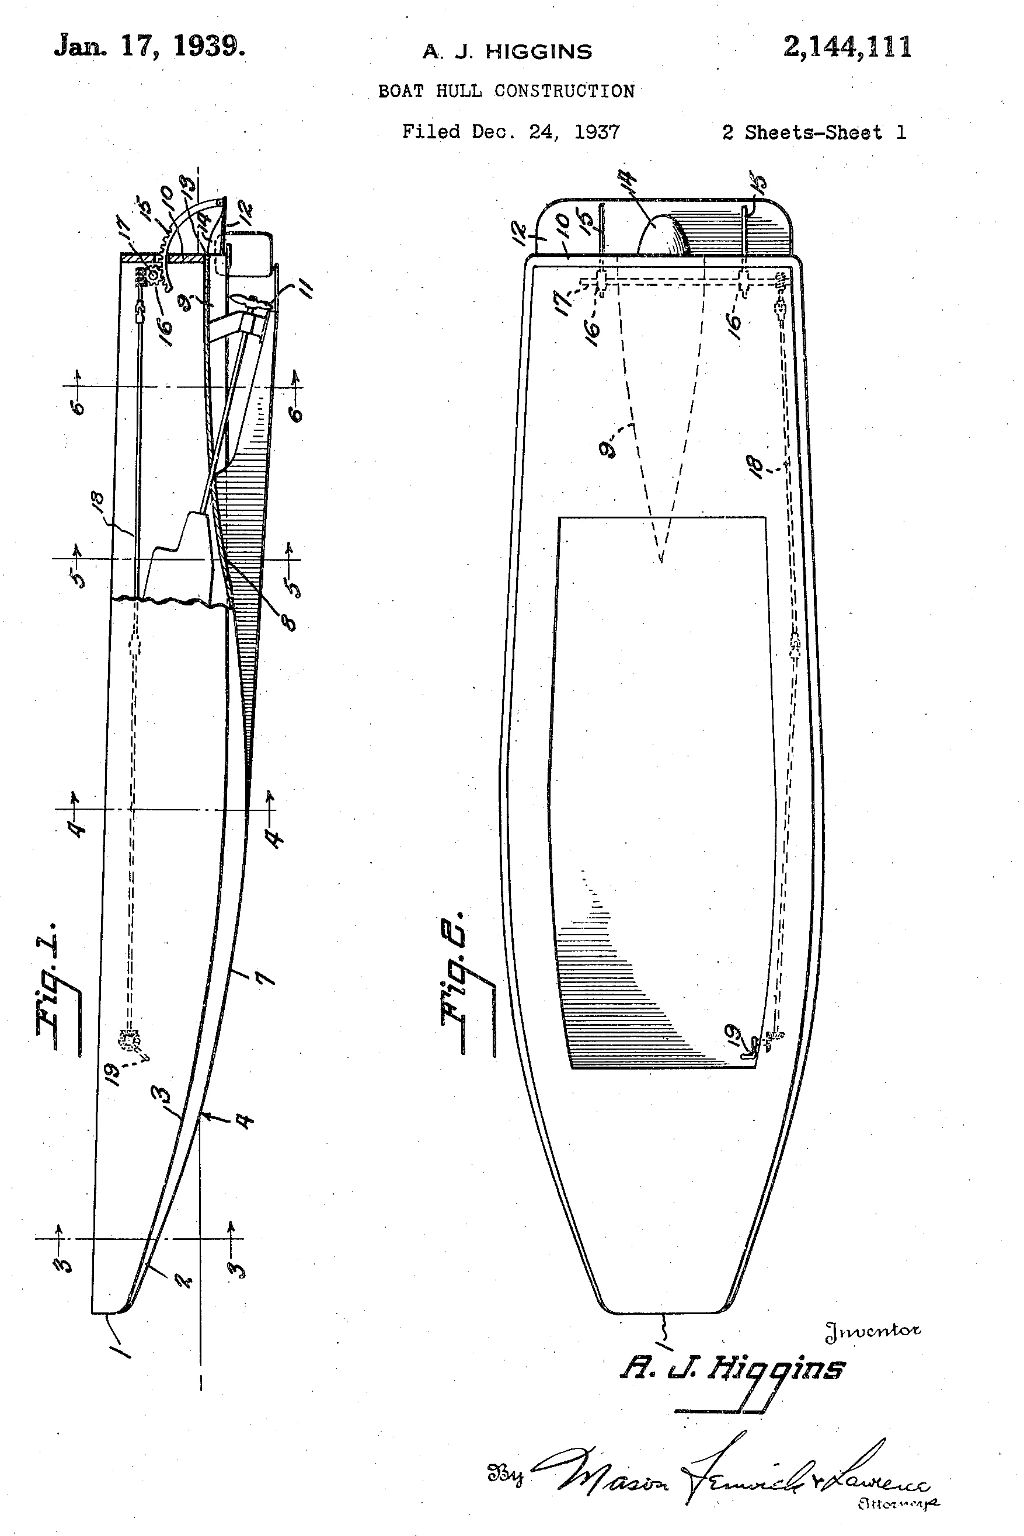 mage: The patent for Higgins Industries “Eureka” boat.